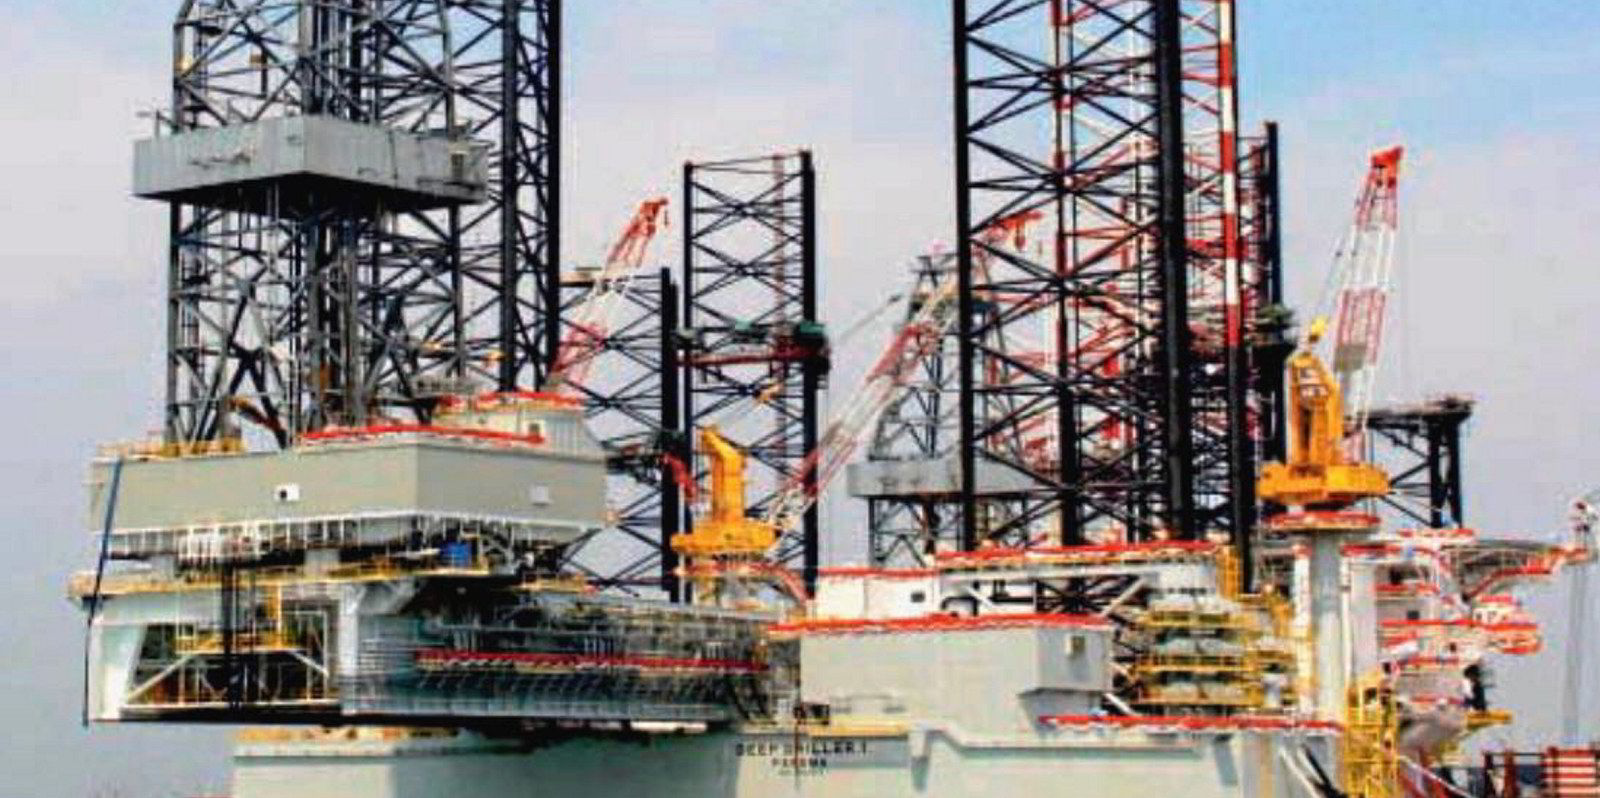 Shelf Drilling completes acquisition to boost fleet of jack-up rigs | Upstream Online